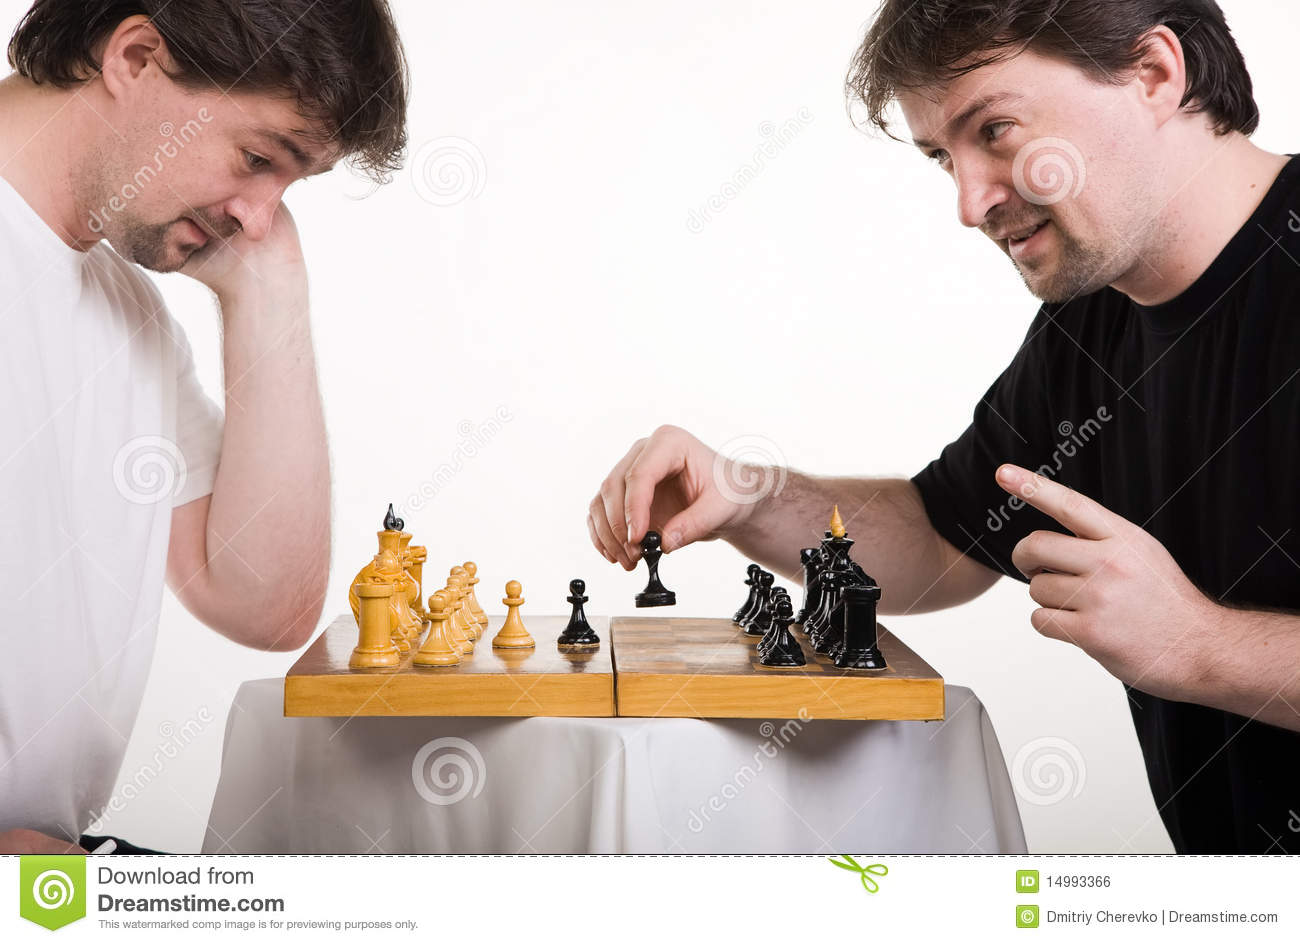 play chess 2 player